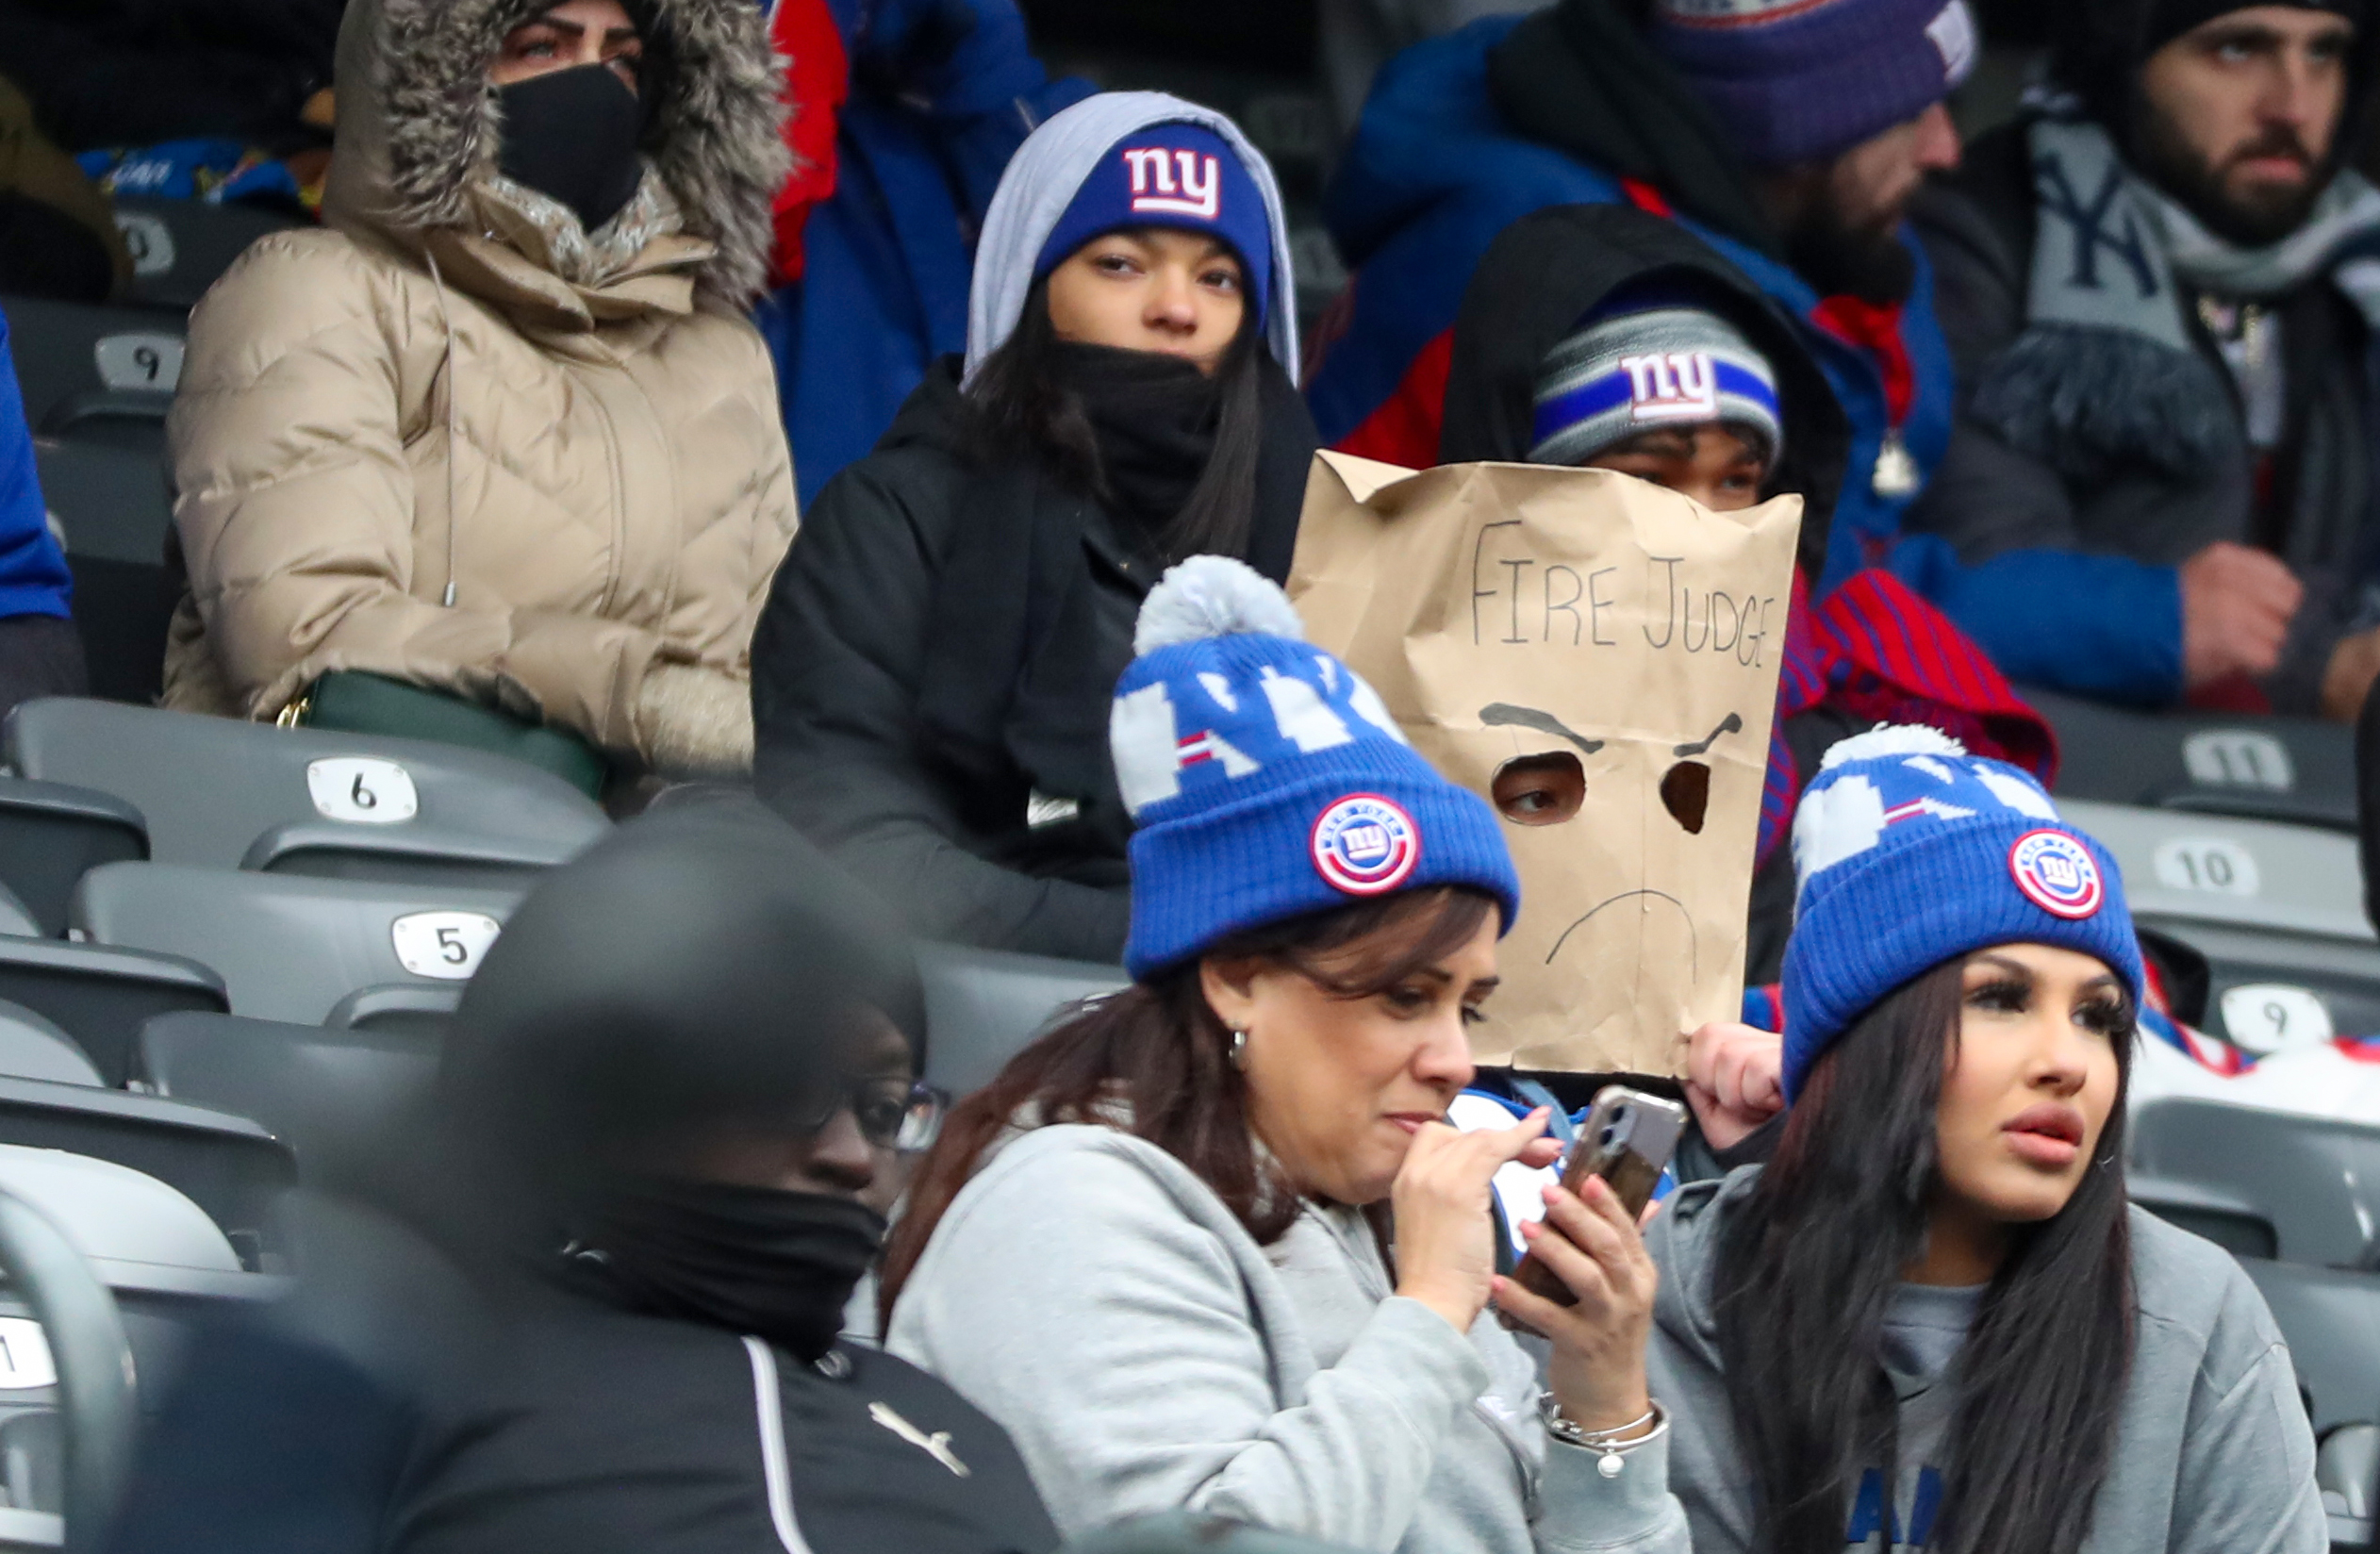 A fan wearing a bag on his head during the second quarter against the Washington Football Team on Sunday, Jan. 9, 2022 in East Rutherford, N.J.